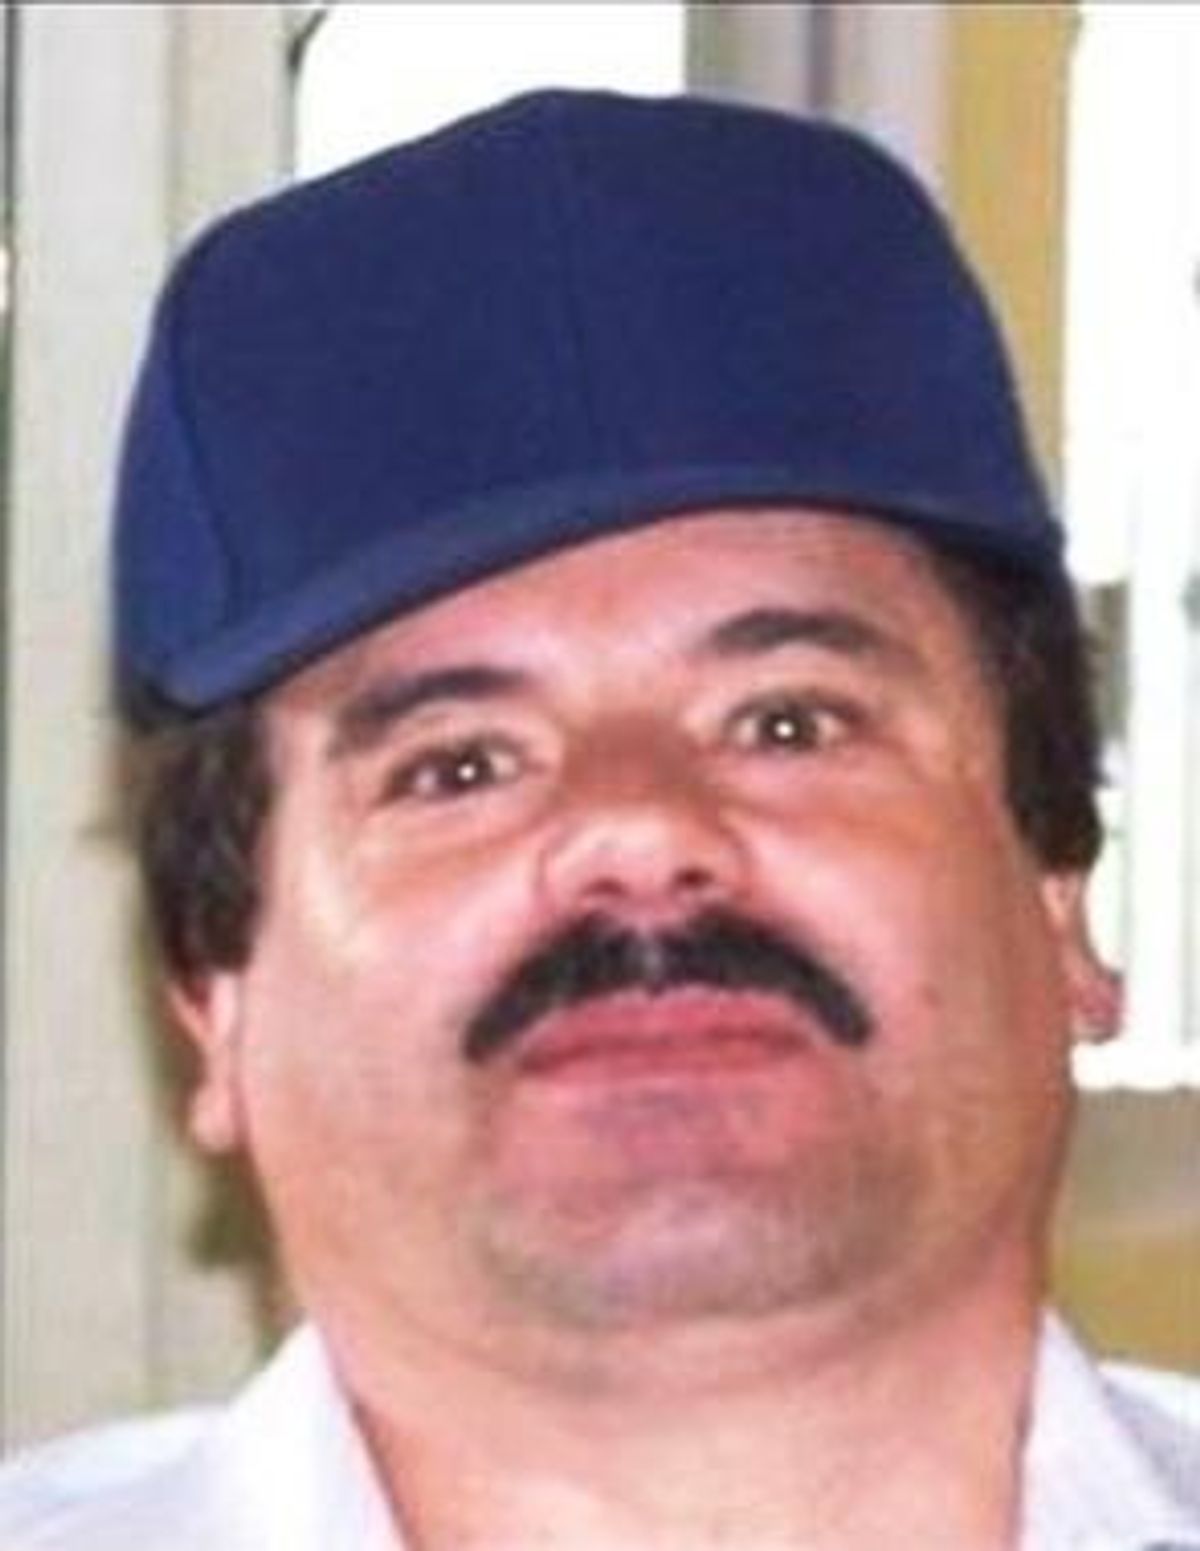 Things  "El Chapo" Guzman Might be Doing While In Hiding